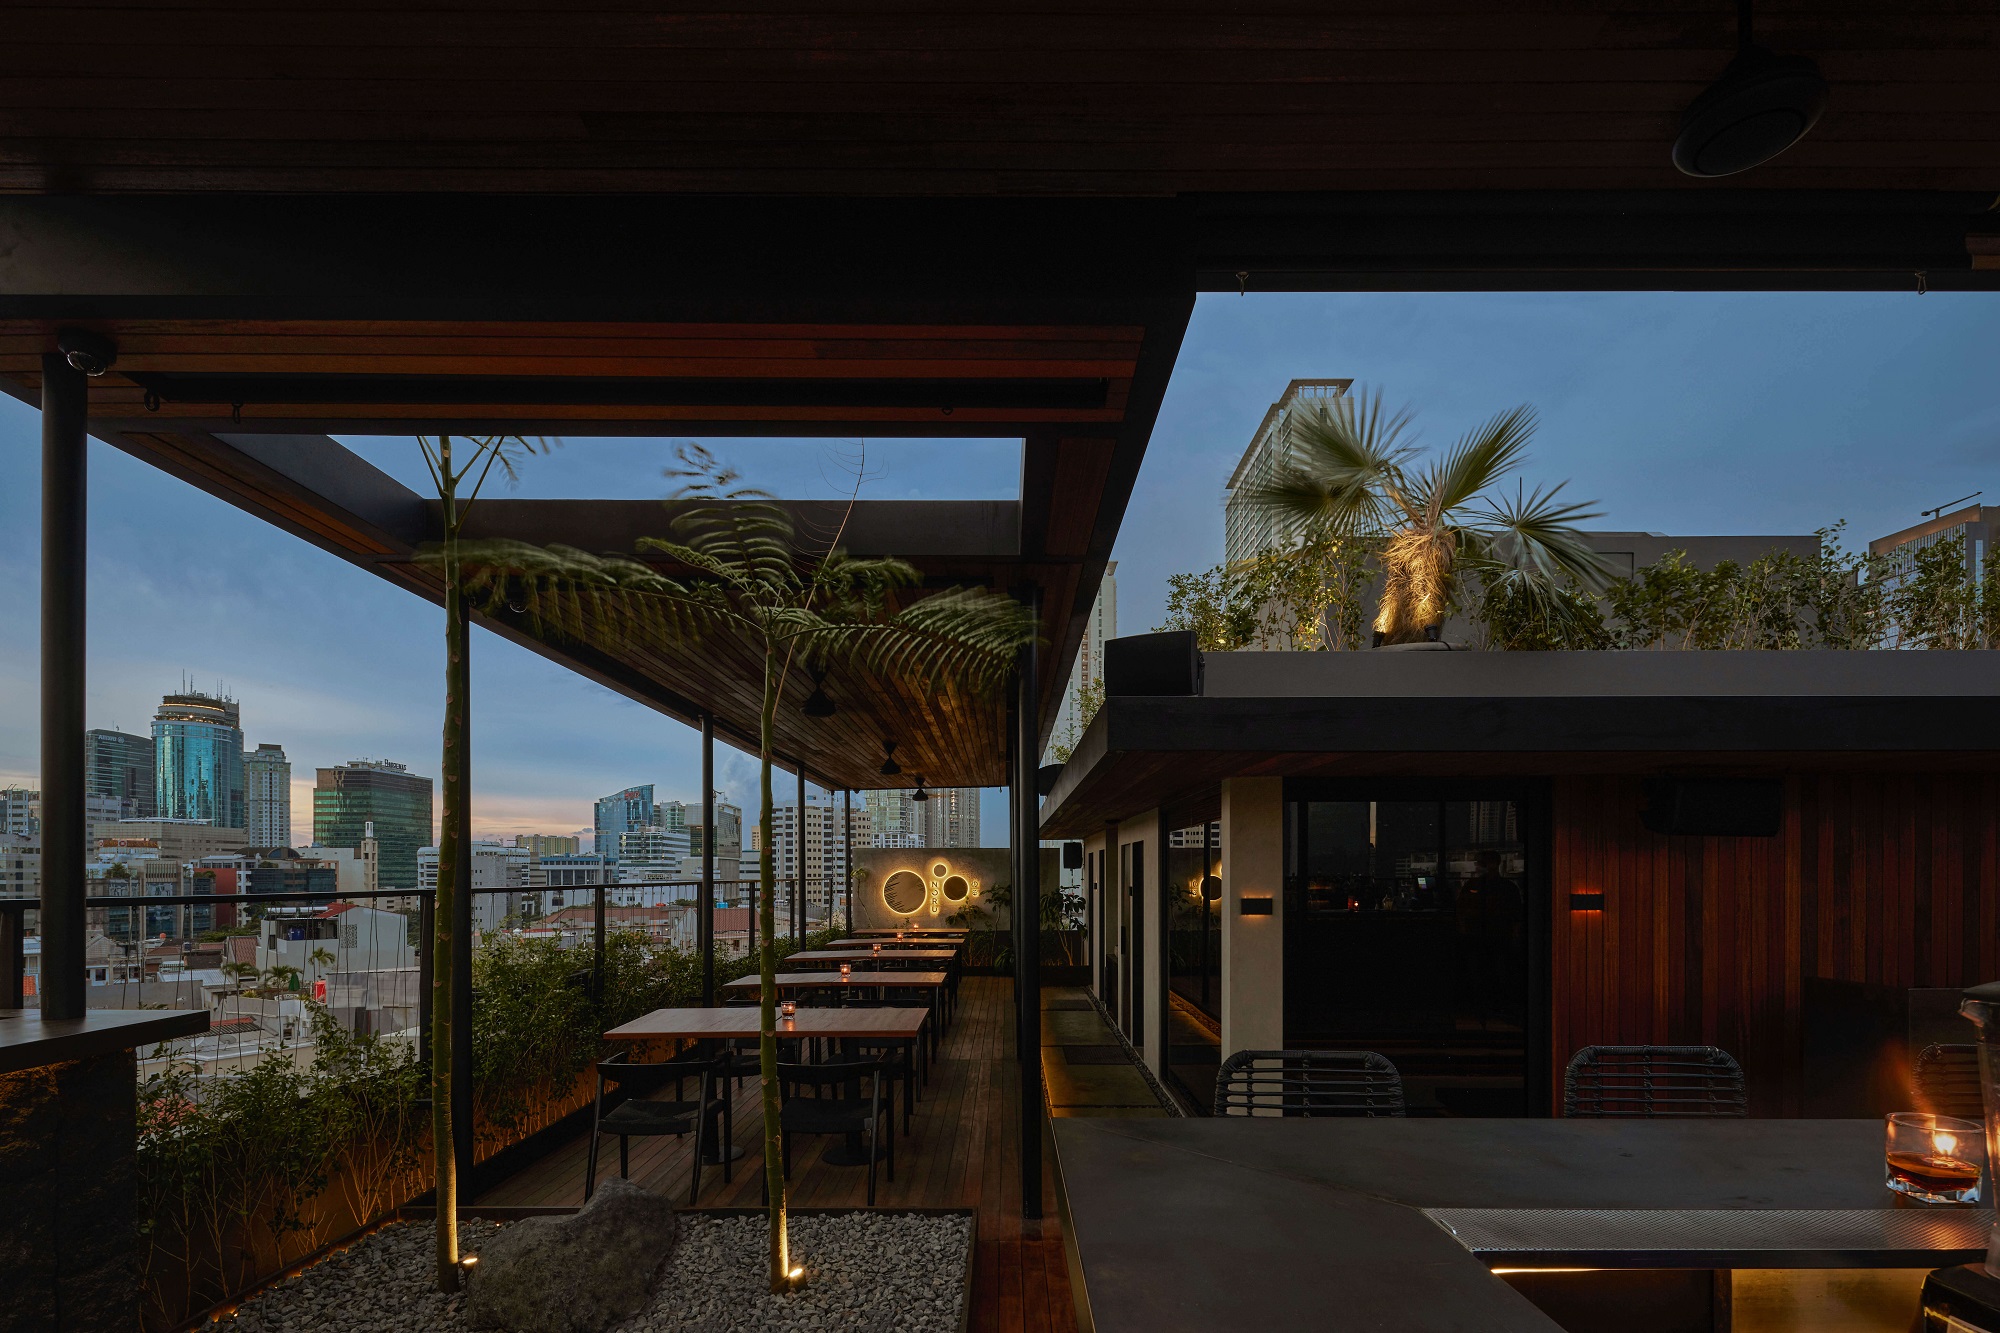 NORU is a lounge and garden space that rises to the hotel's roof